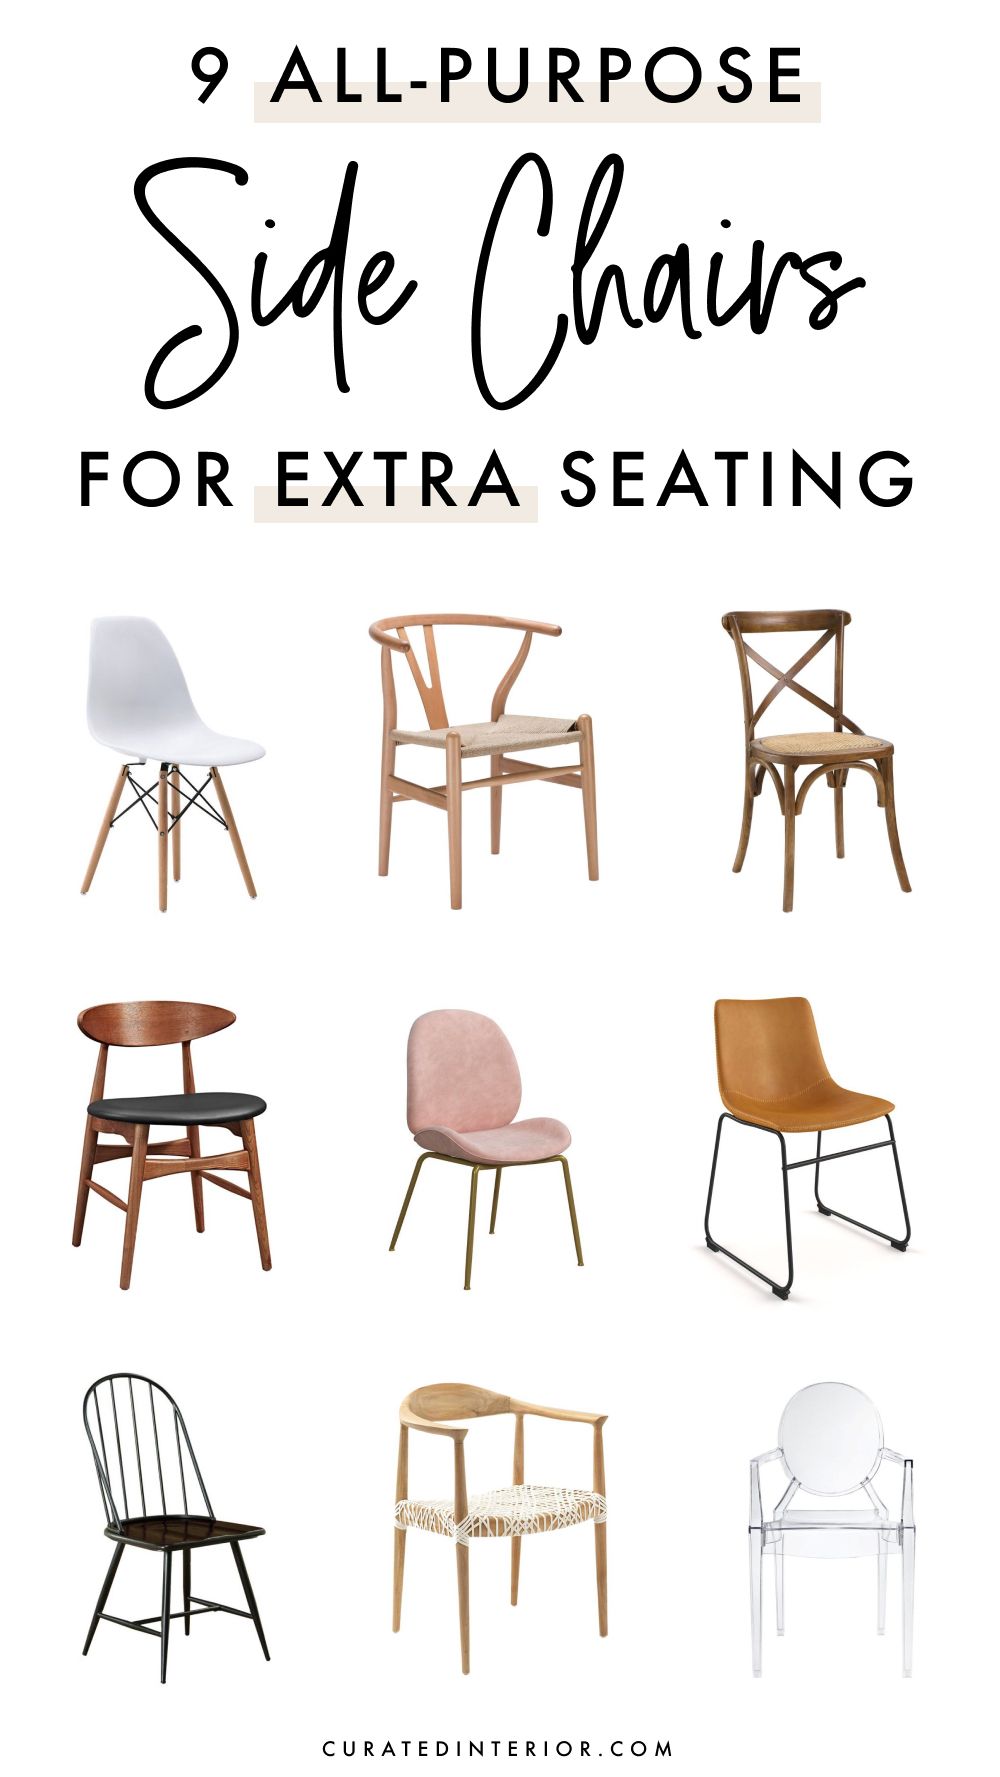 9 All-purpose Side Chairs for Extra Seating!